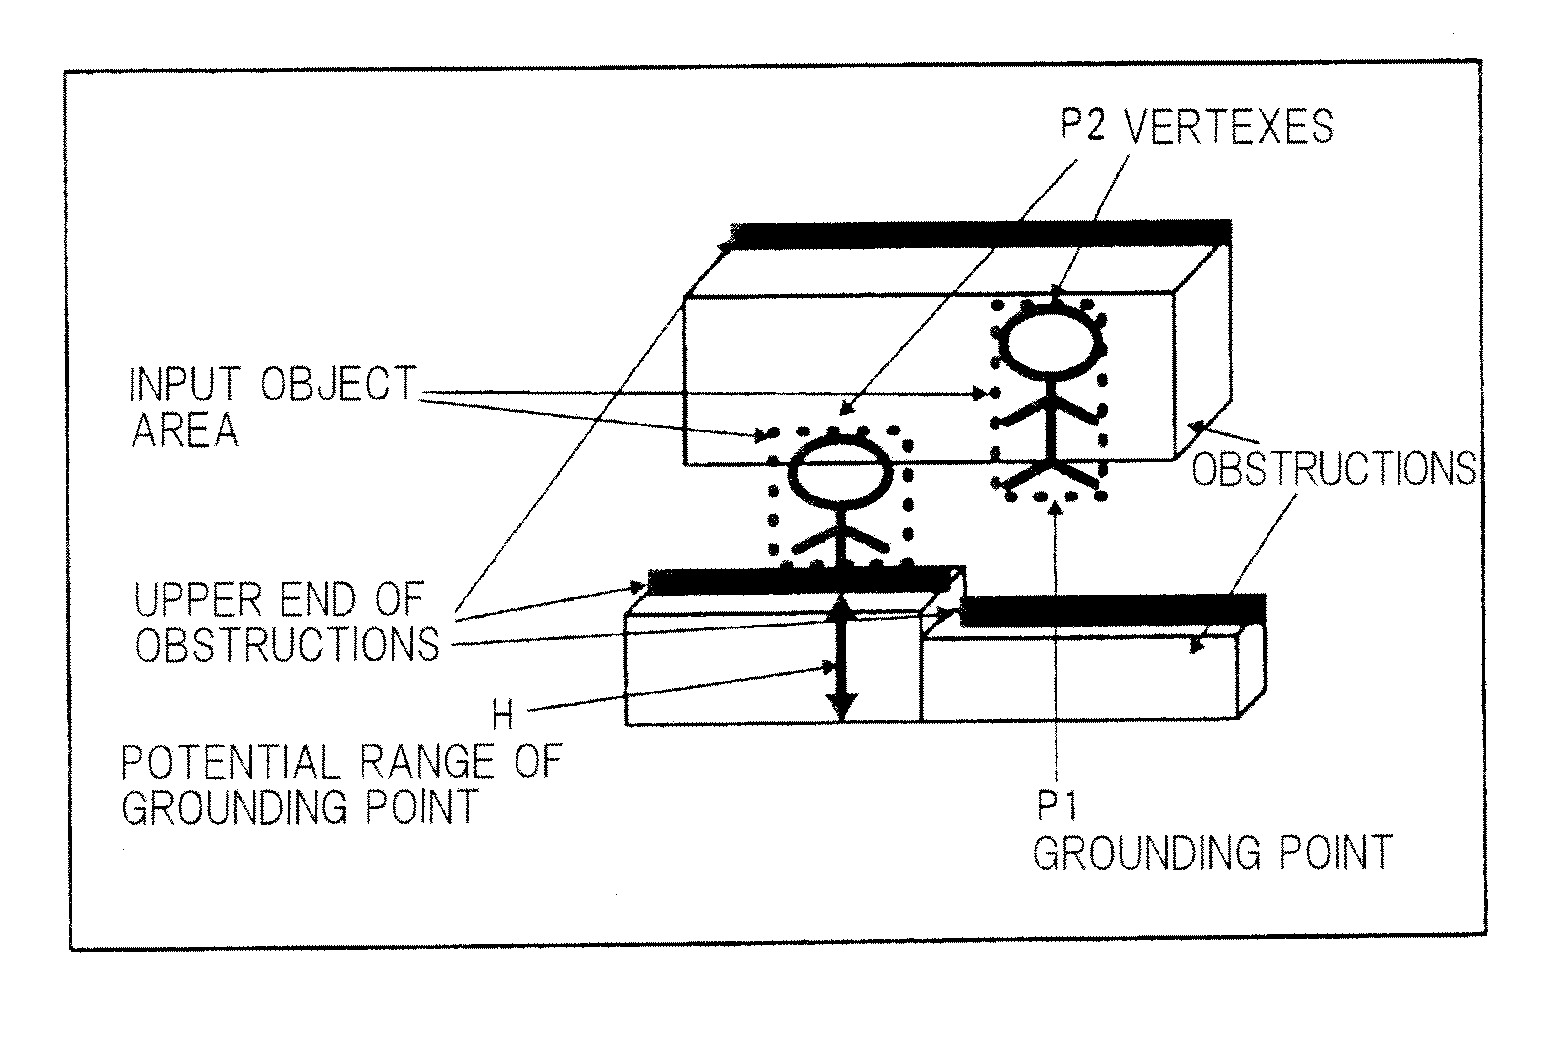 Person-judging device, method, and program